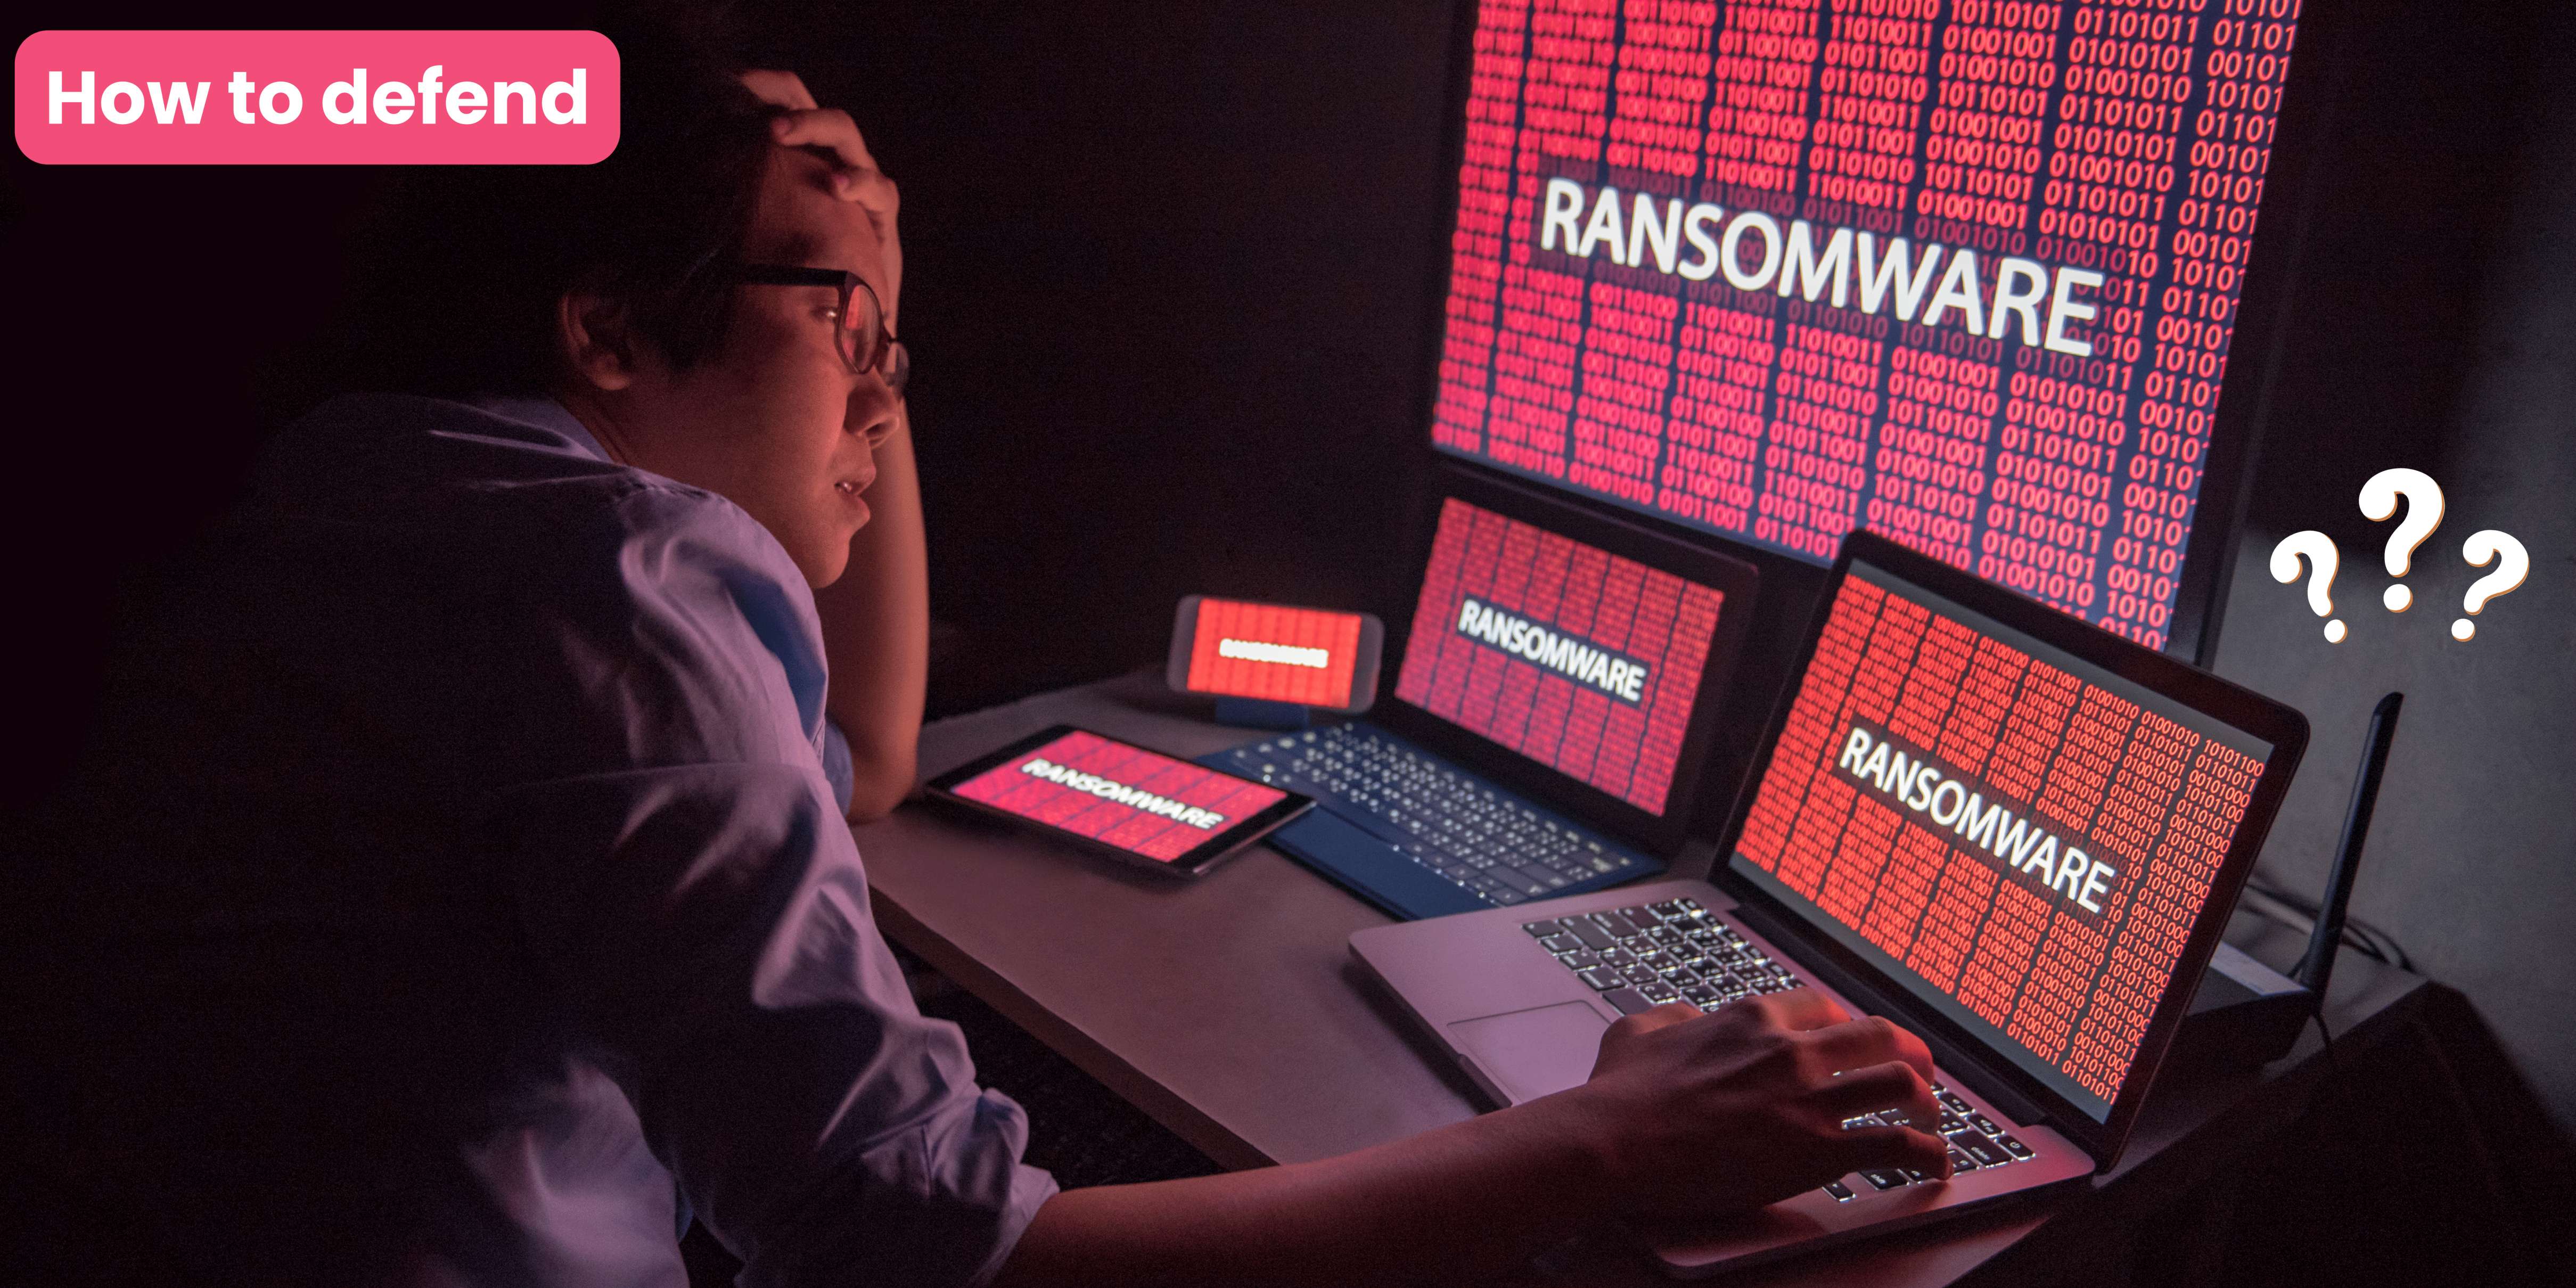 What is Ransomware & How to Defend Against Ransomware Attacks?